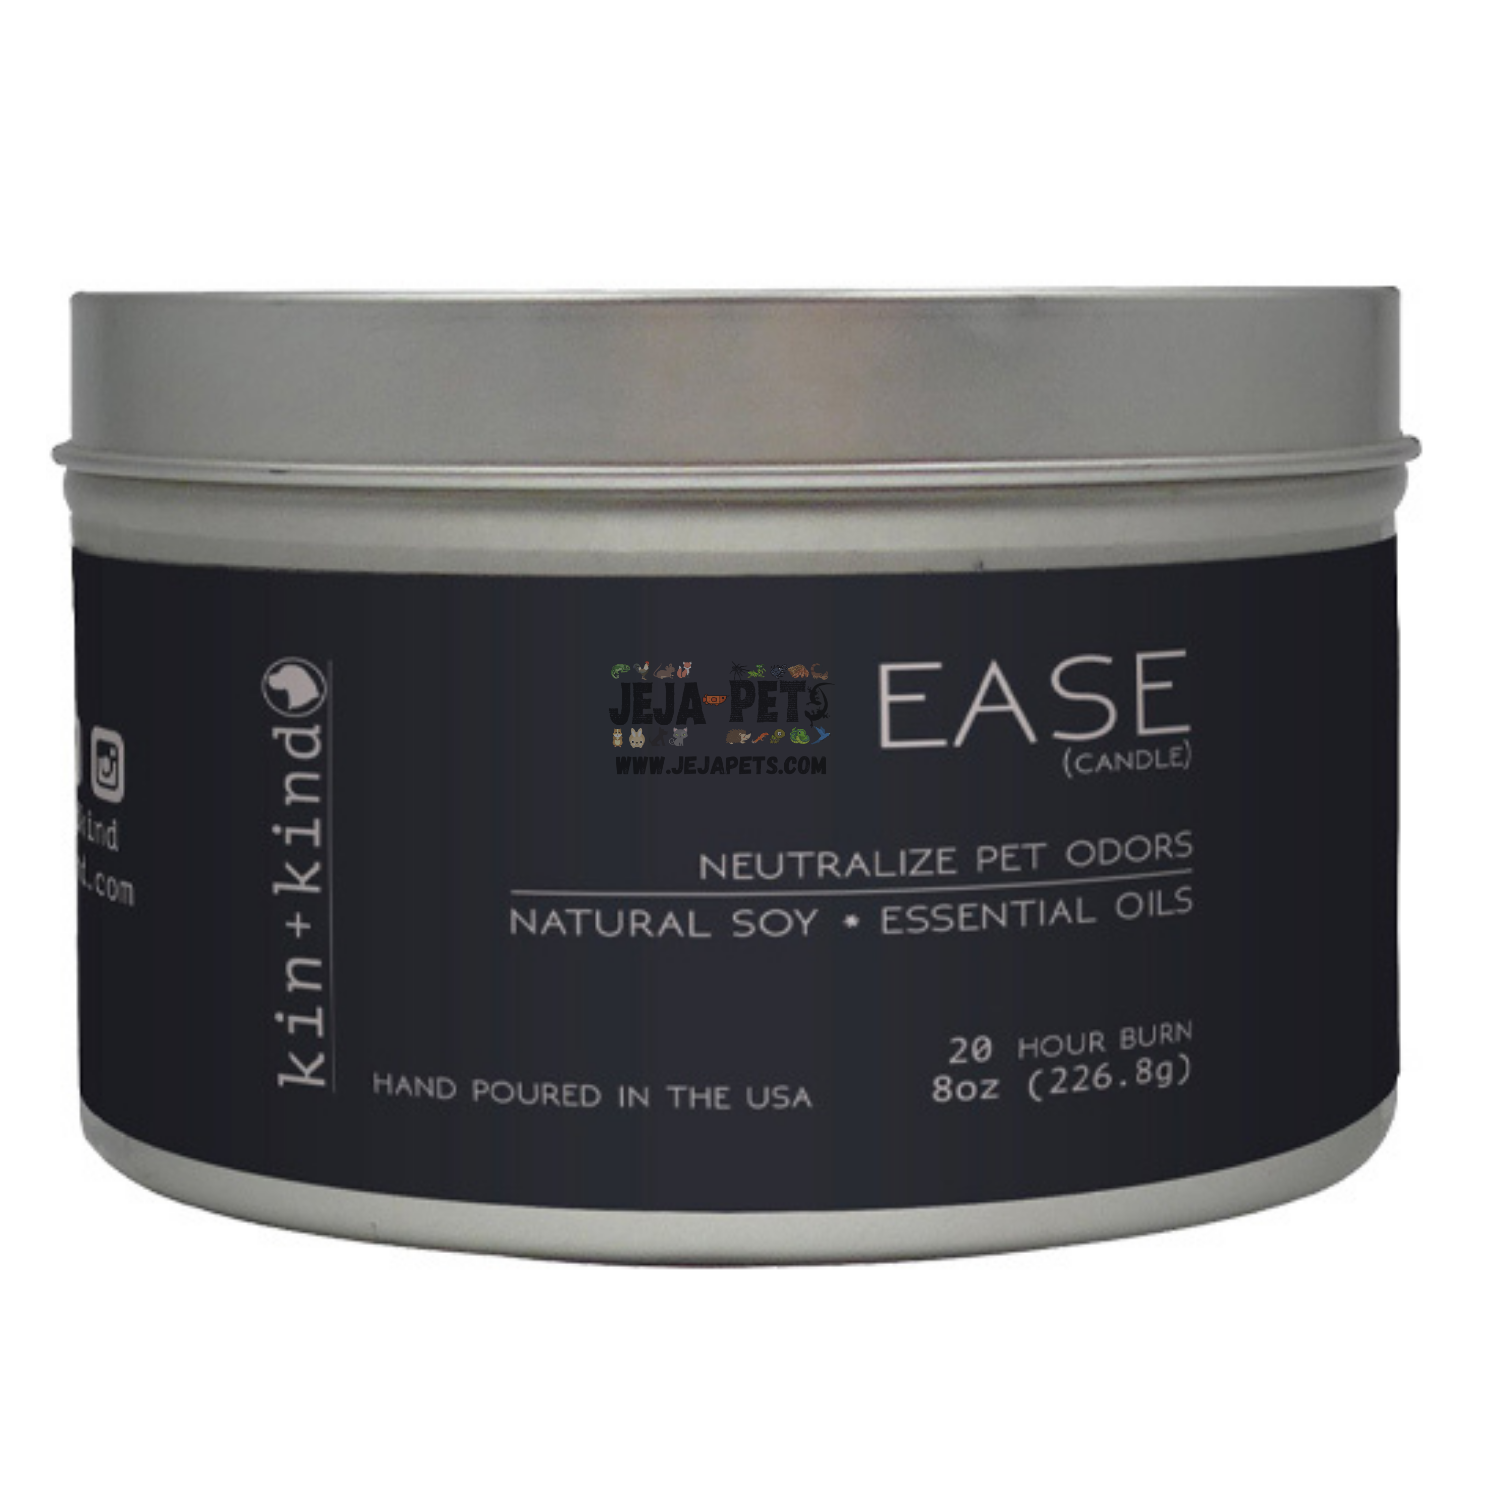 [DISCONTINUED] Kin+Kind Ease Candle - 226.8g